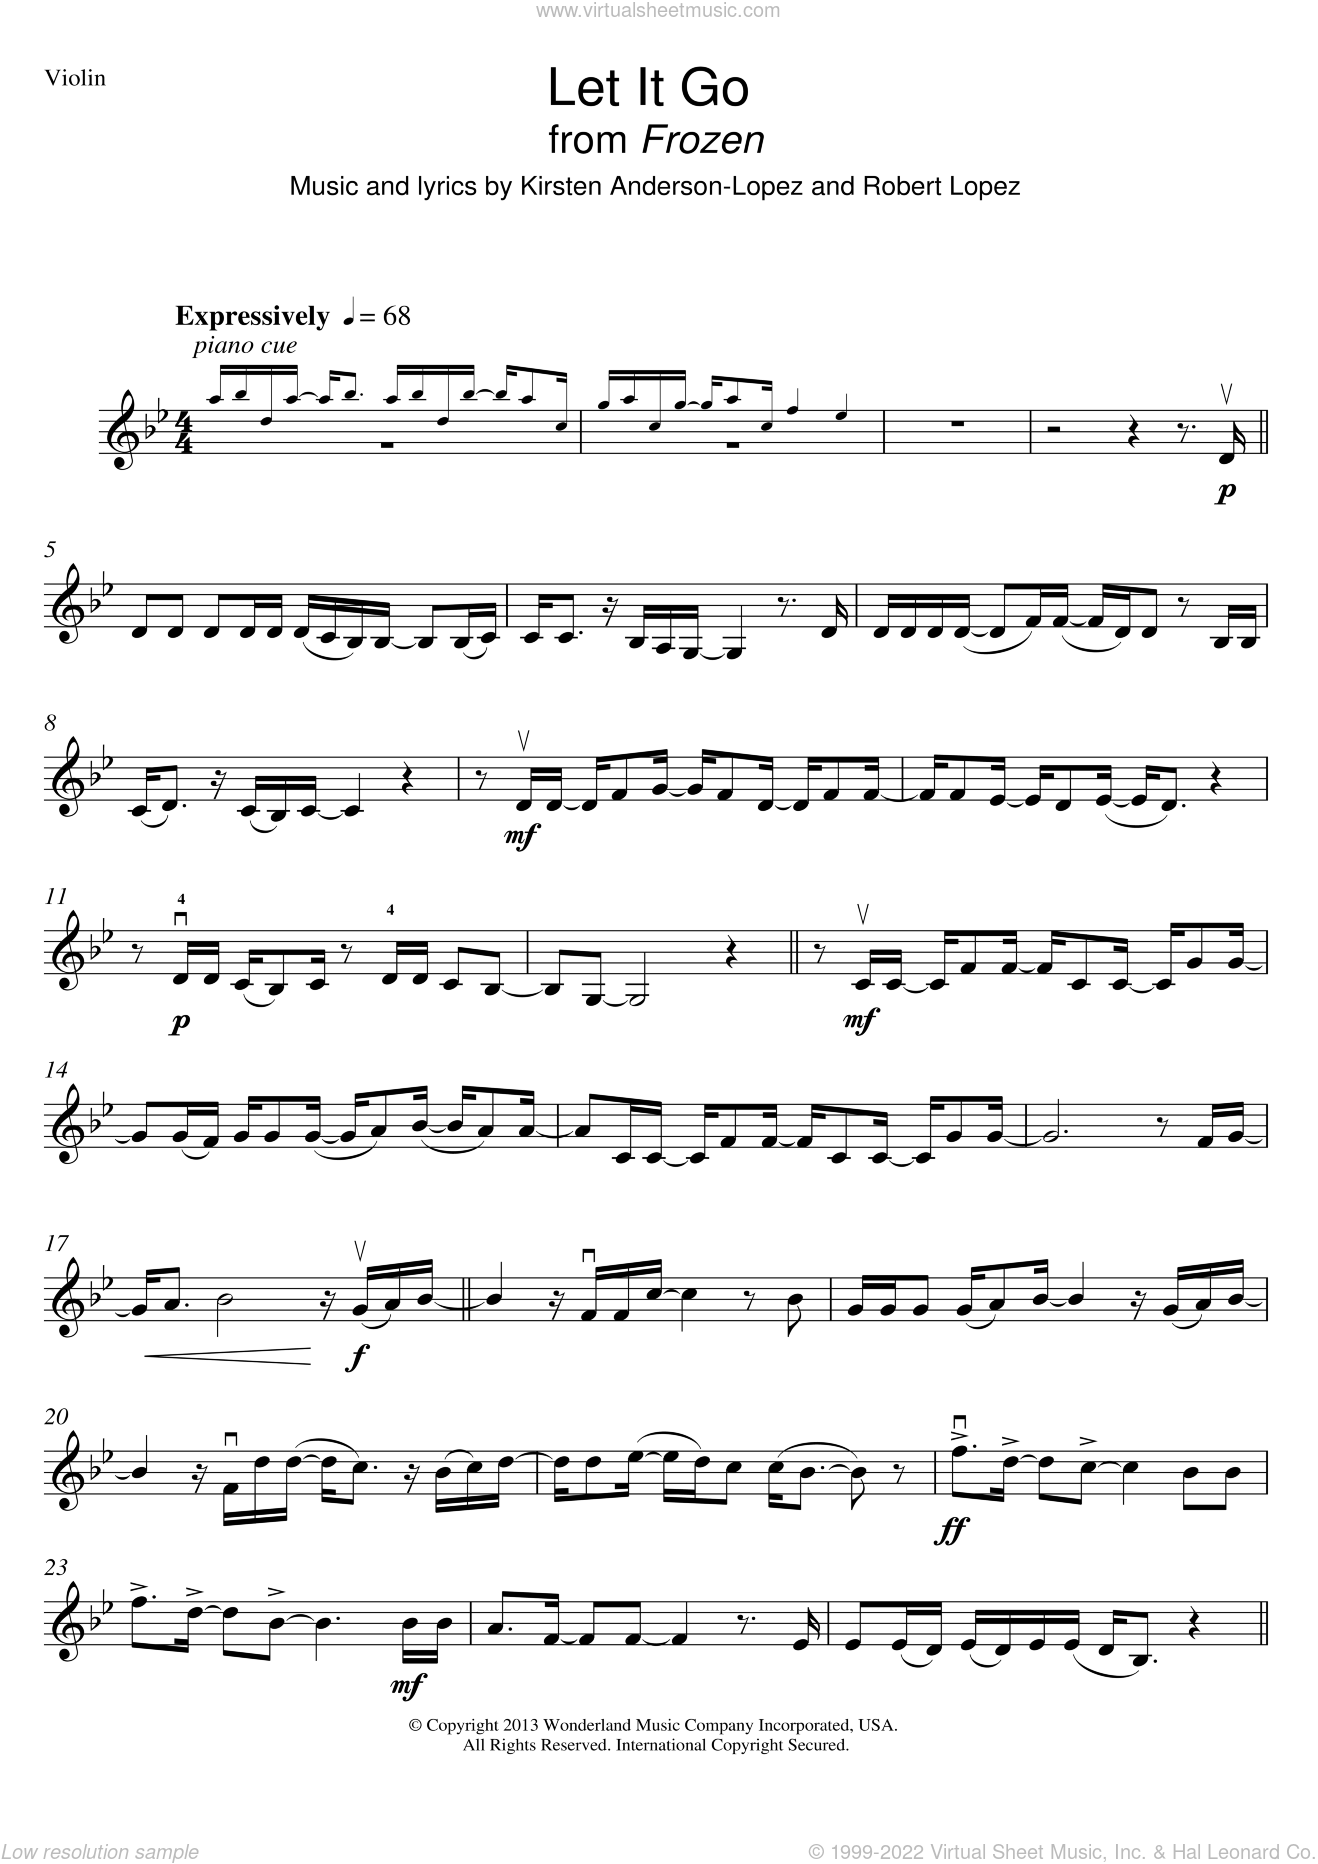 Idina Menzel: Let It Go (From Frozen) Sheet Music For Violin Solo